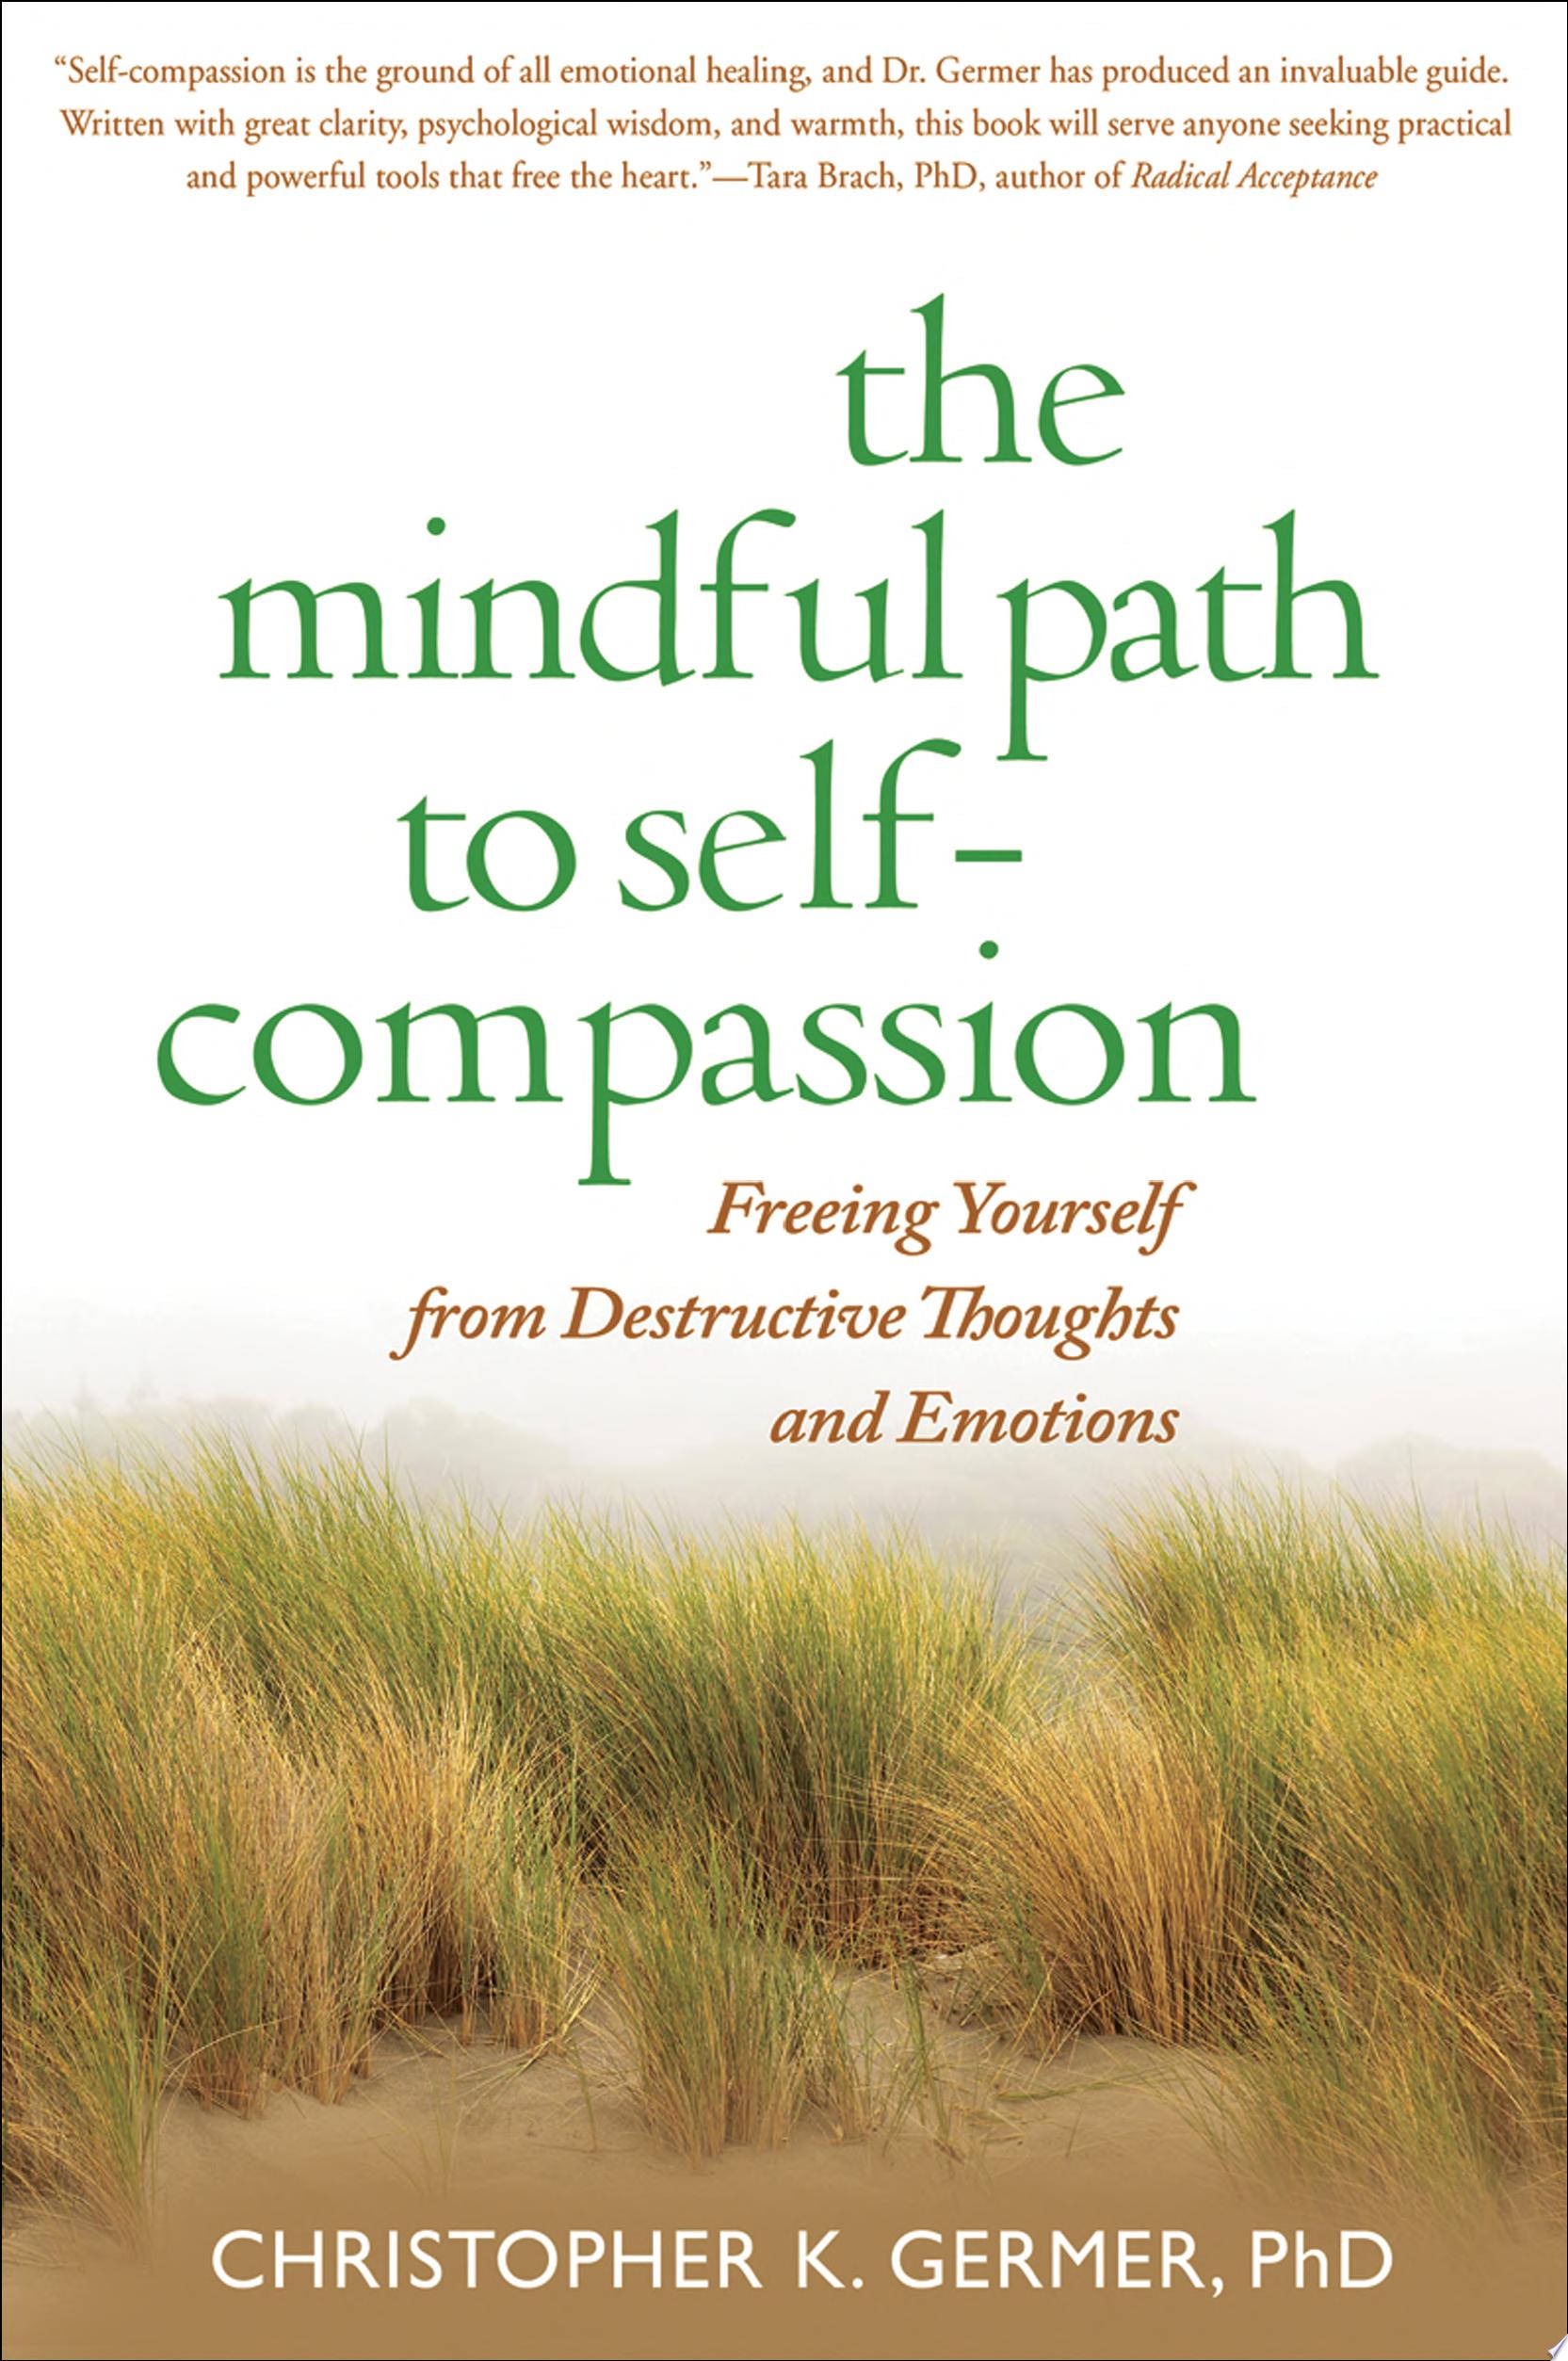 Image for "The Mindful Path to Self-compassion"